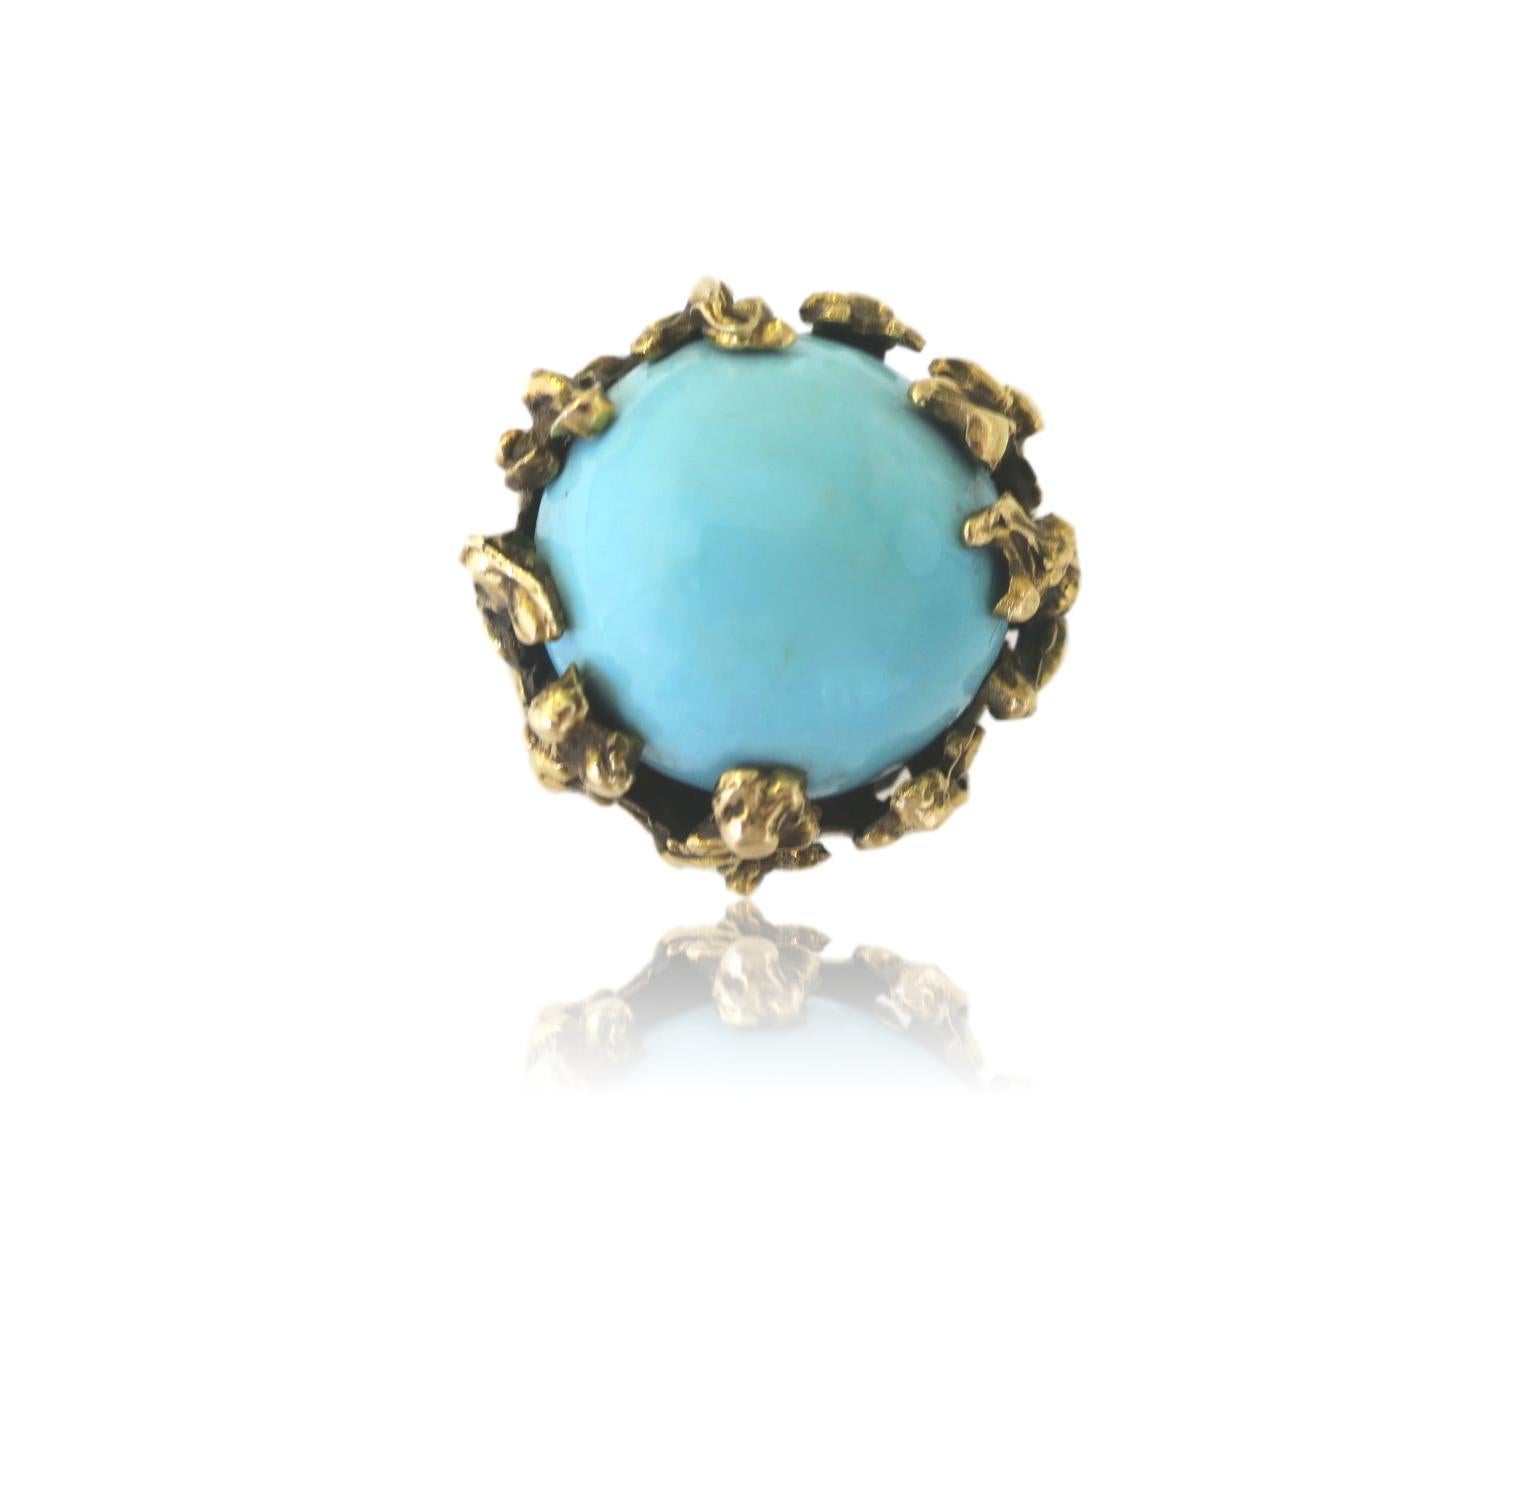 Handcrafted Turquoise and Gold ring. The 14K Yellow freeform ring with a gold brutalistic stylized foliage designed setting encasing a 7/8